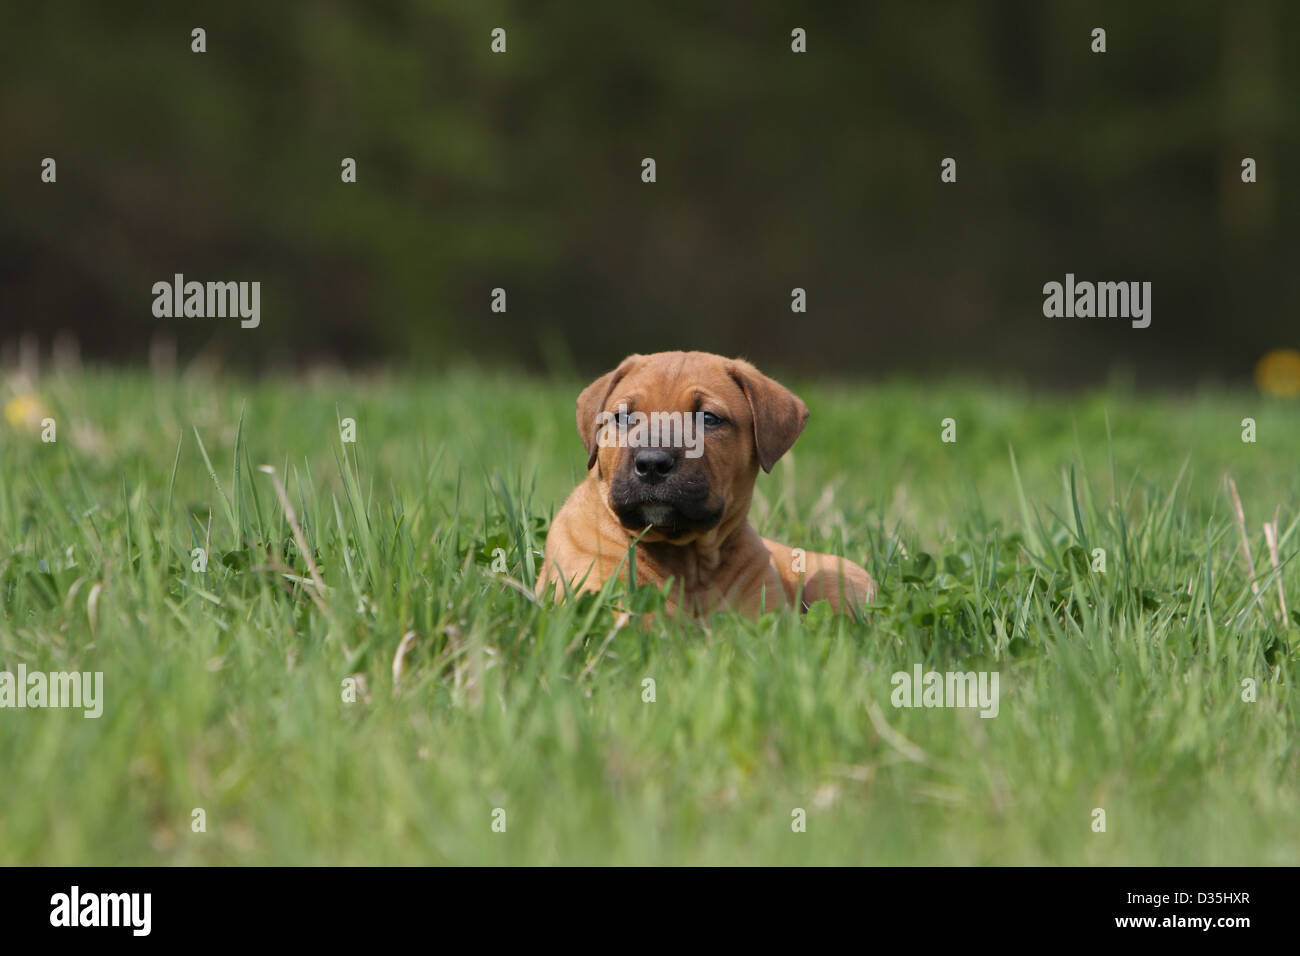 Dog Tosa Inu / Japanese Mastiff  puppy lying in a meadow Stock Photo